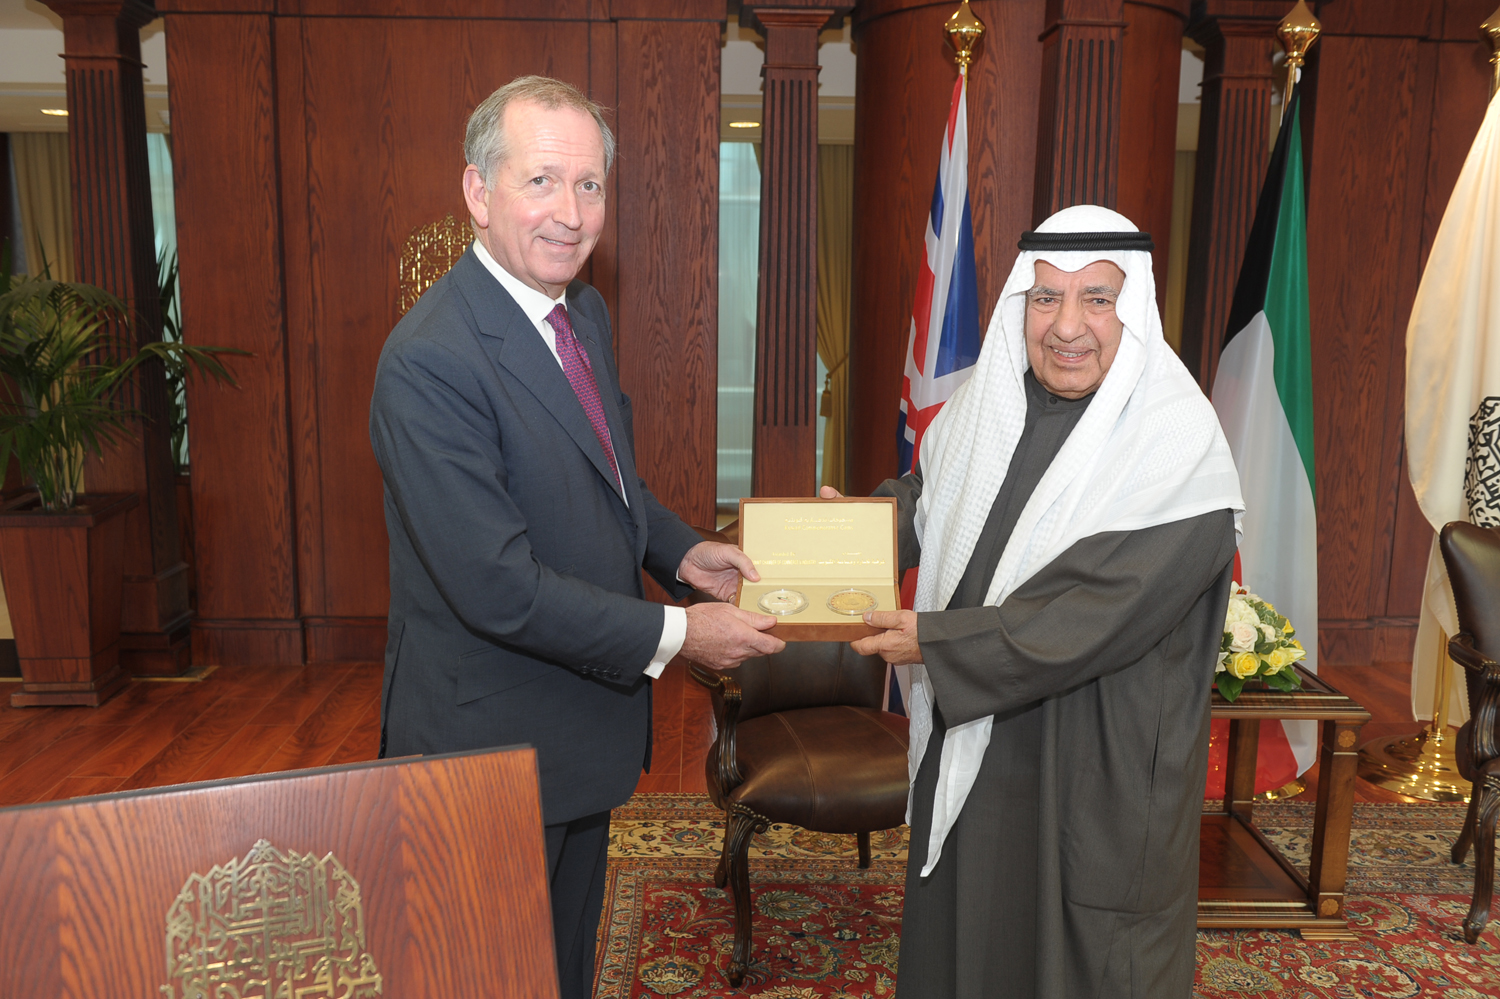 chairman of the Kuwait Chamber of Commerce and Industry (KCCI) Ali Al-Ghanim meets Lord Mayor of the City of London Alderman Alan Yarrow